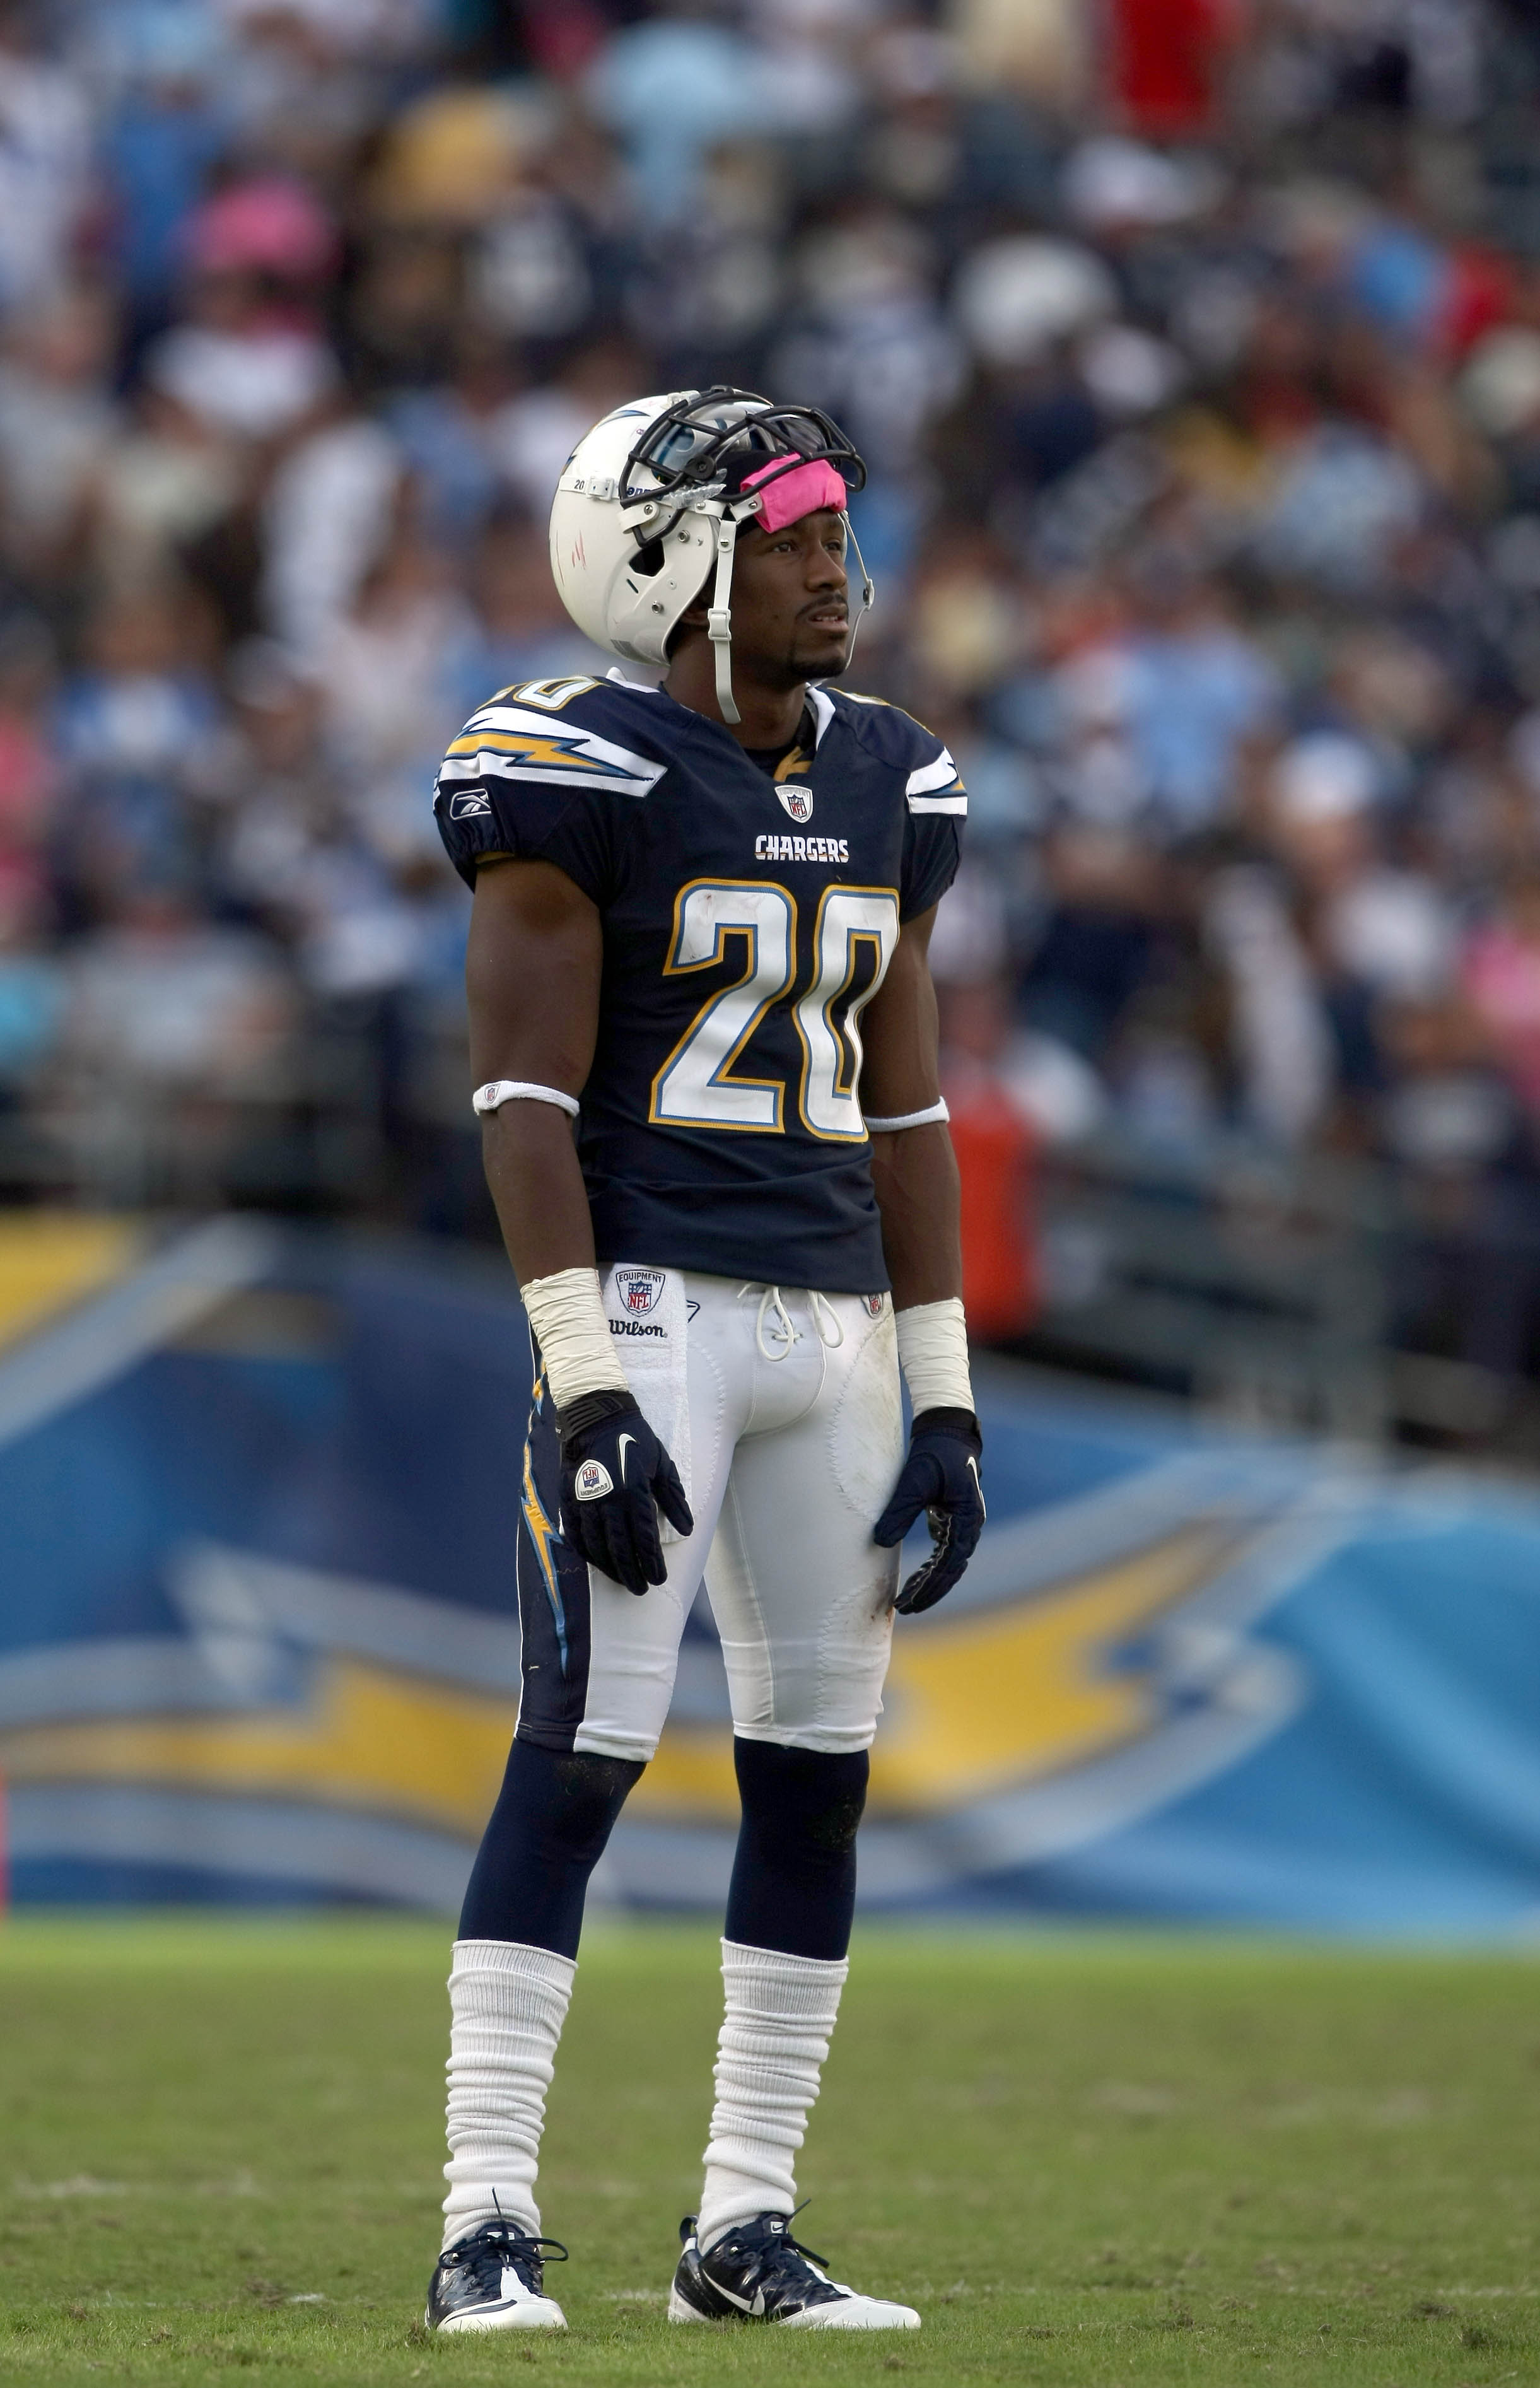 SAN DIEGO - OCTOBER 24:  Antoine Cason #20 of the San Diego Chargers looks on in disbelief after teammate Kicker Kris Brown #3 misses a field goal to tie at the end of regulation against the New England Patriots during NFL game on October 24, 2010 at Qual